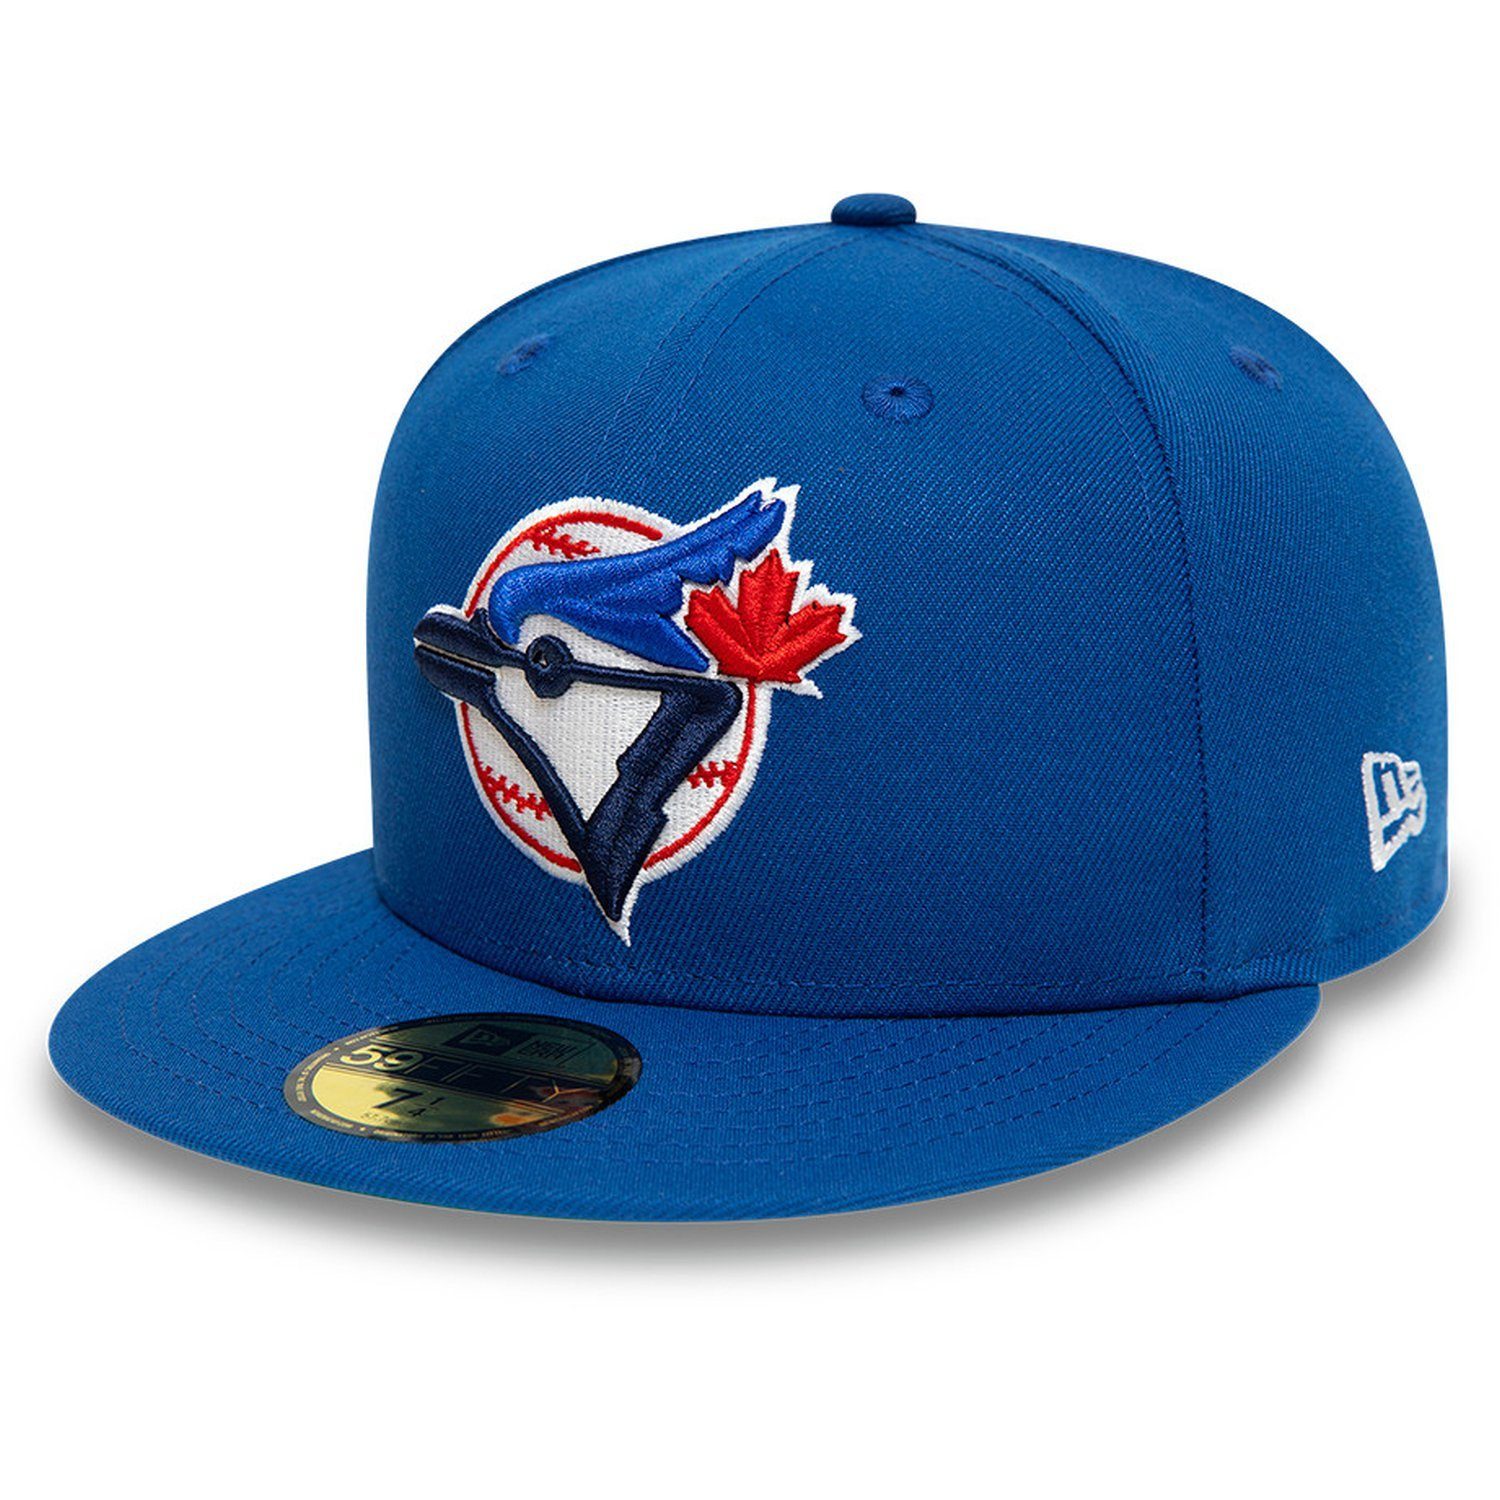 WORLD Toronto Cap SERIES Era Fitted Jays New 59Fifty